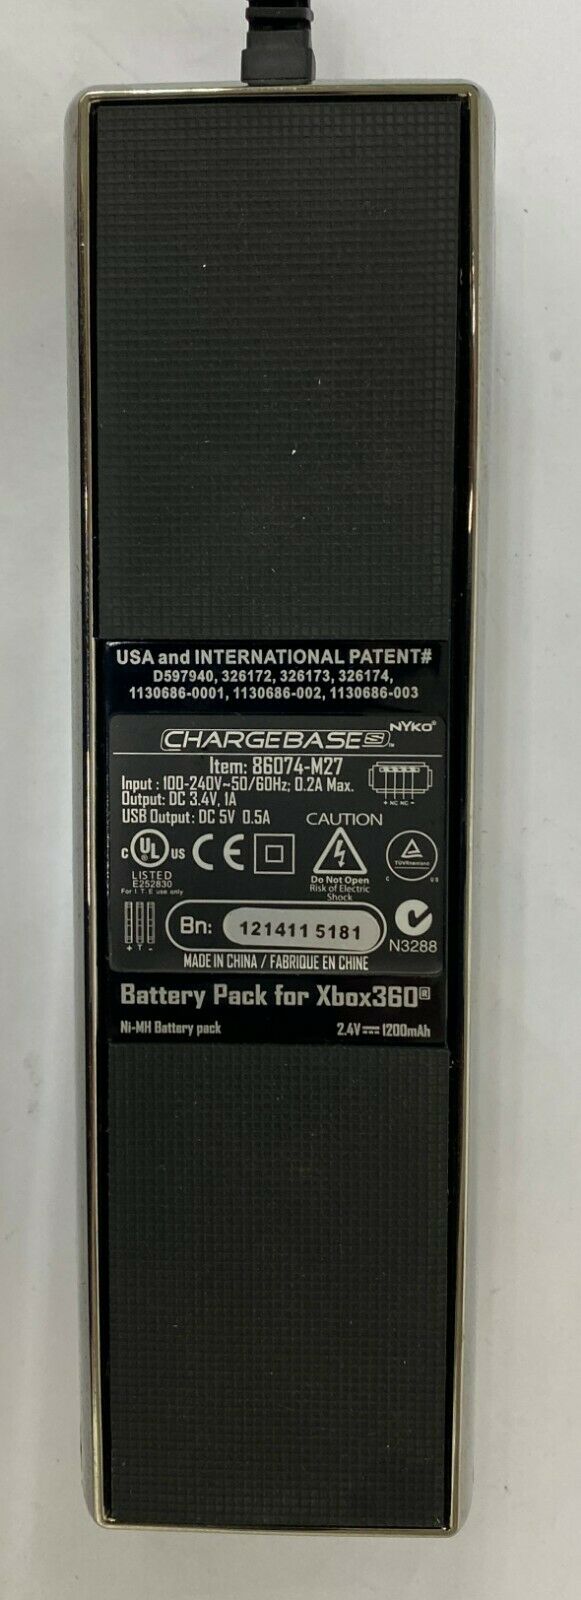 Xbox 360  Nyko Dual Controller Battery Charge Base- 86074-M27